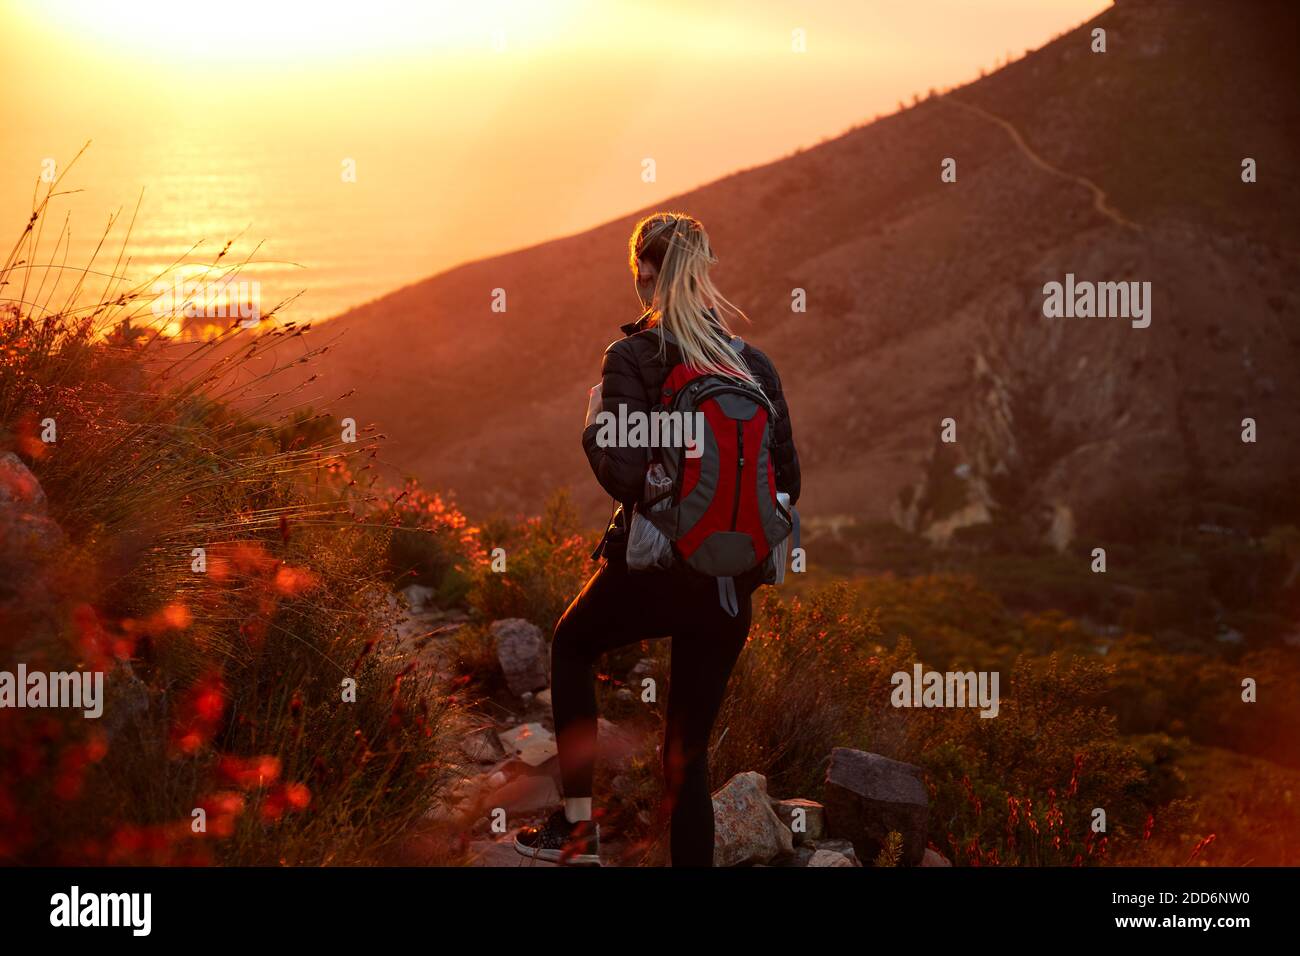 Rear view of young woman on vacation wearing backpack setting off on hike climbing coastal path at sunset Stock Photo